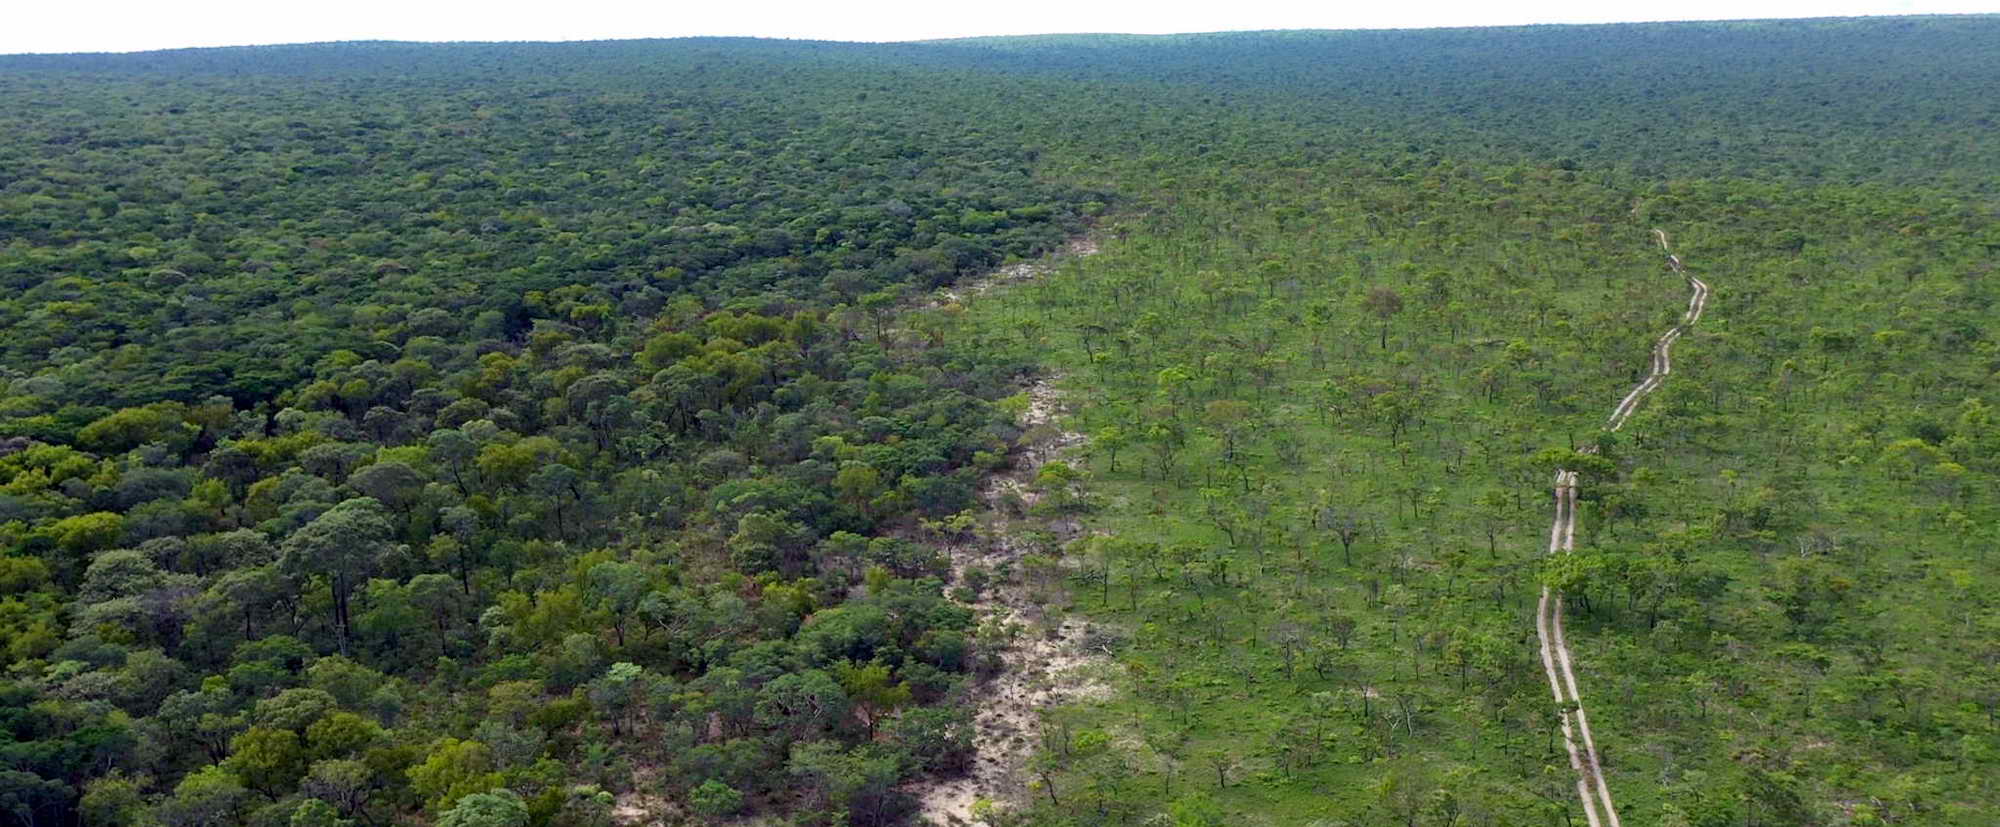 An aerial view showing thick woodland and open savannah divided by a distinct pale bare strip.